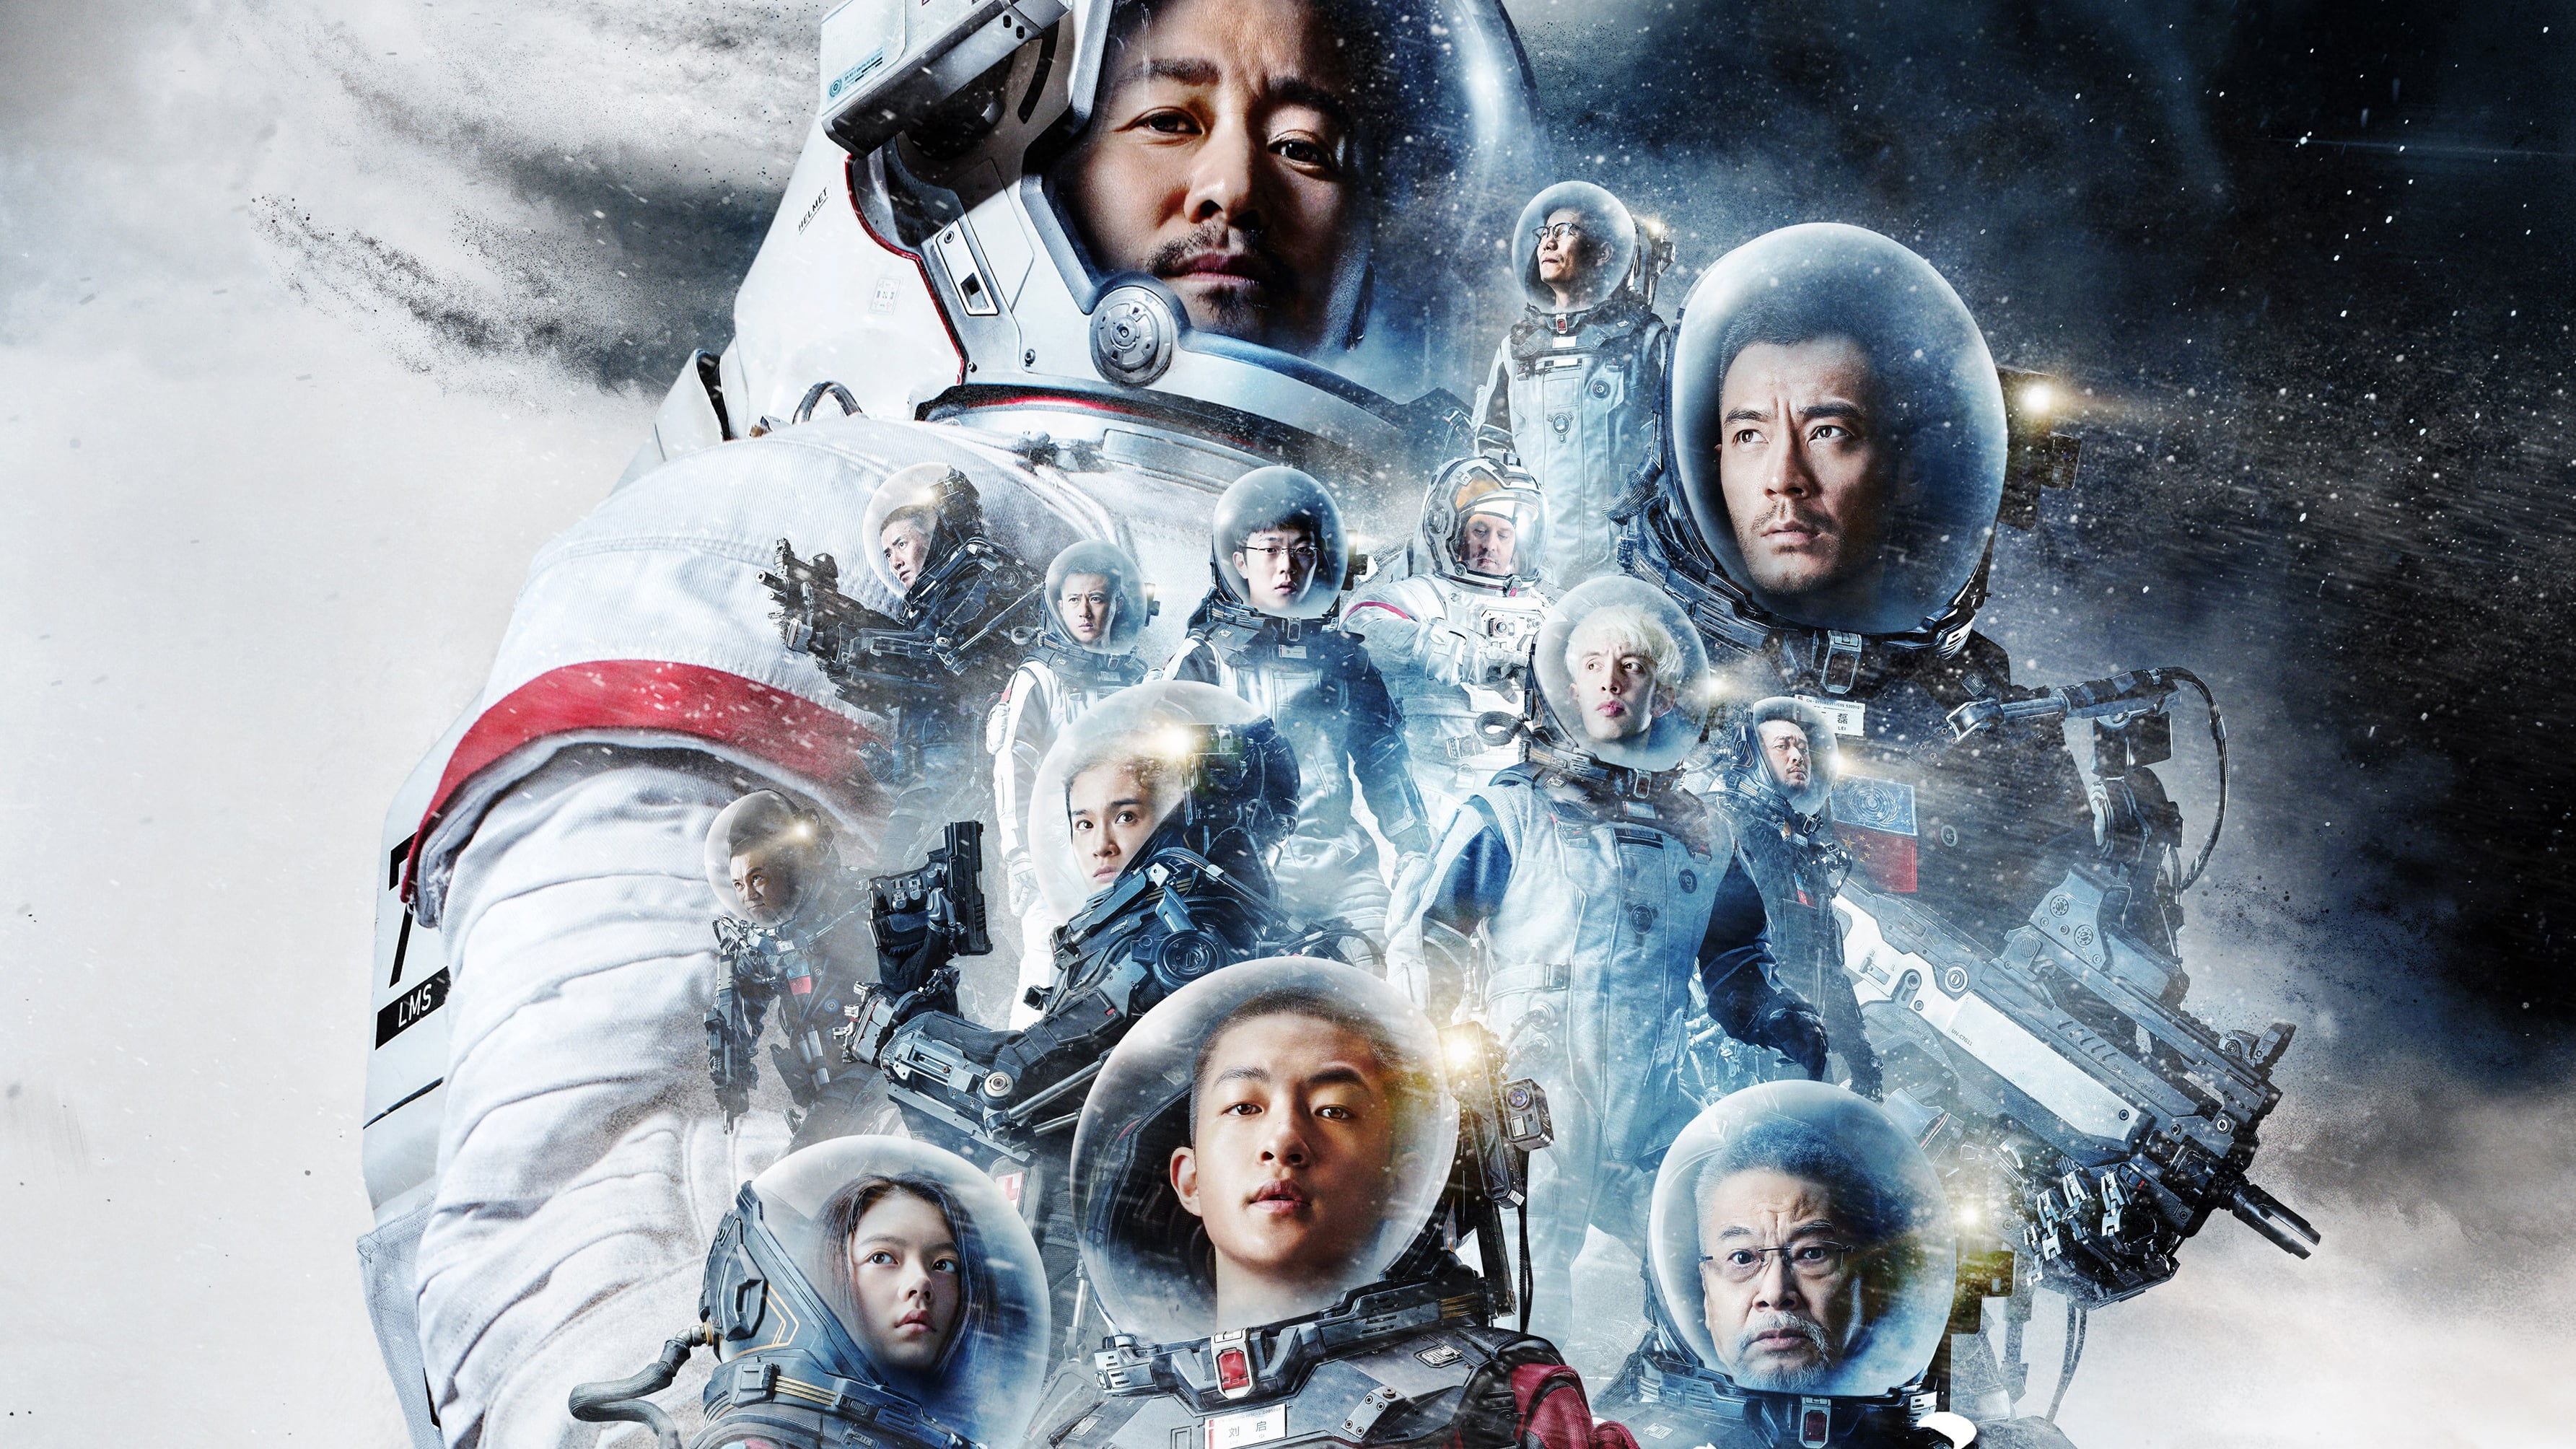 The Wandering Earth Review